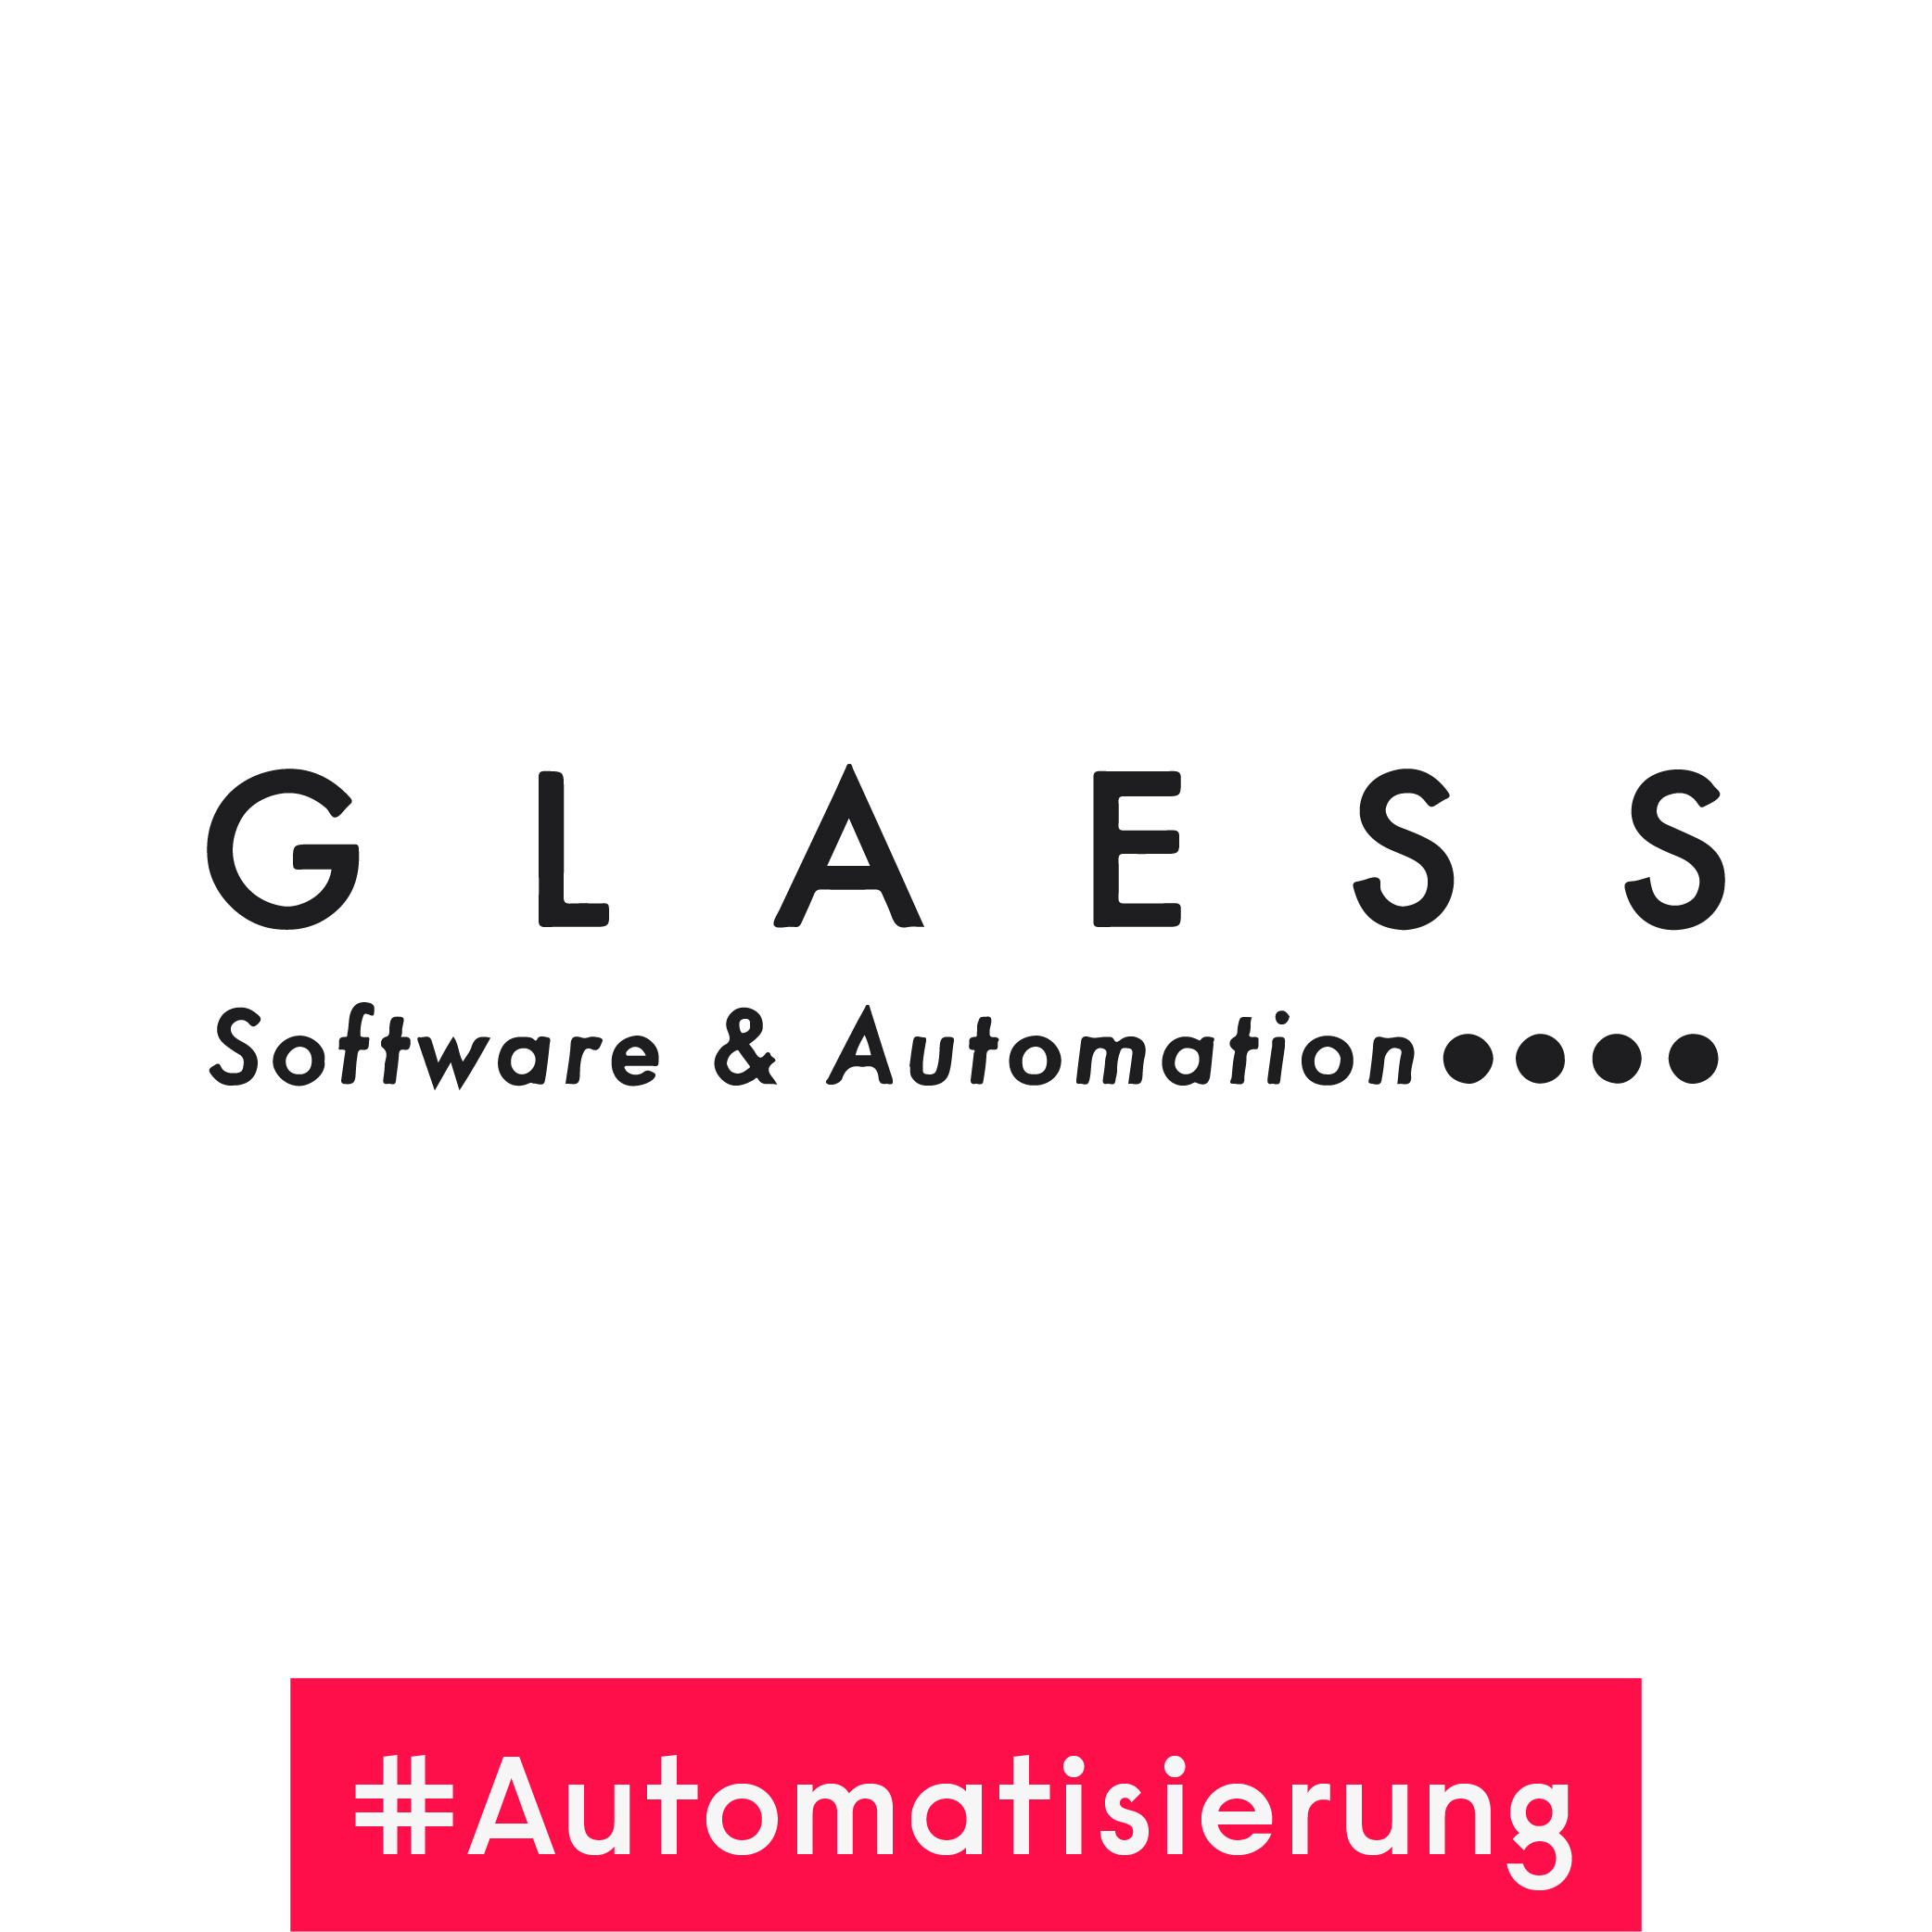 GLAESS Software & Automation